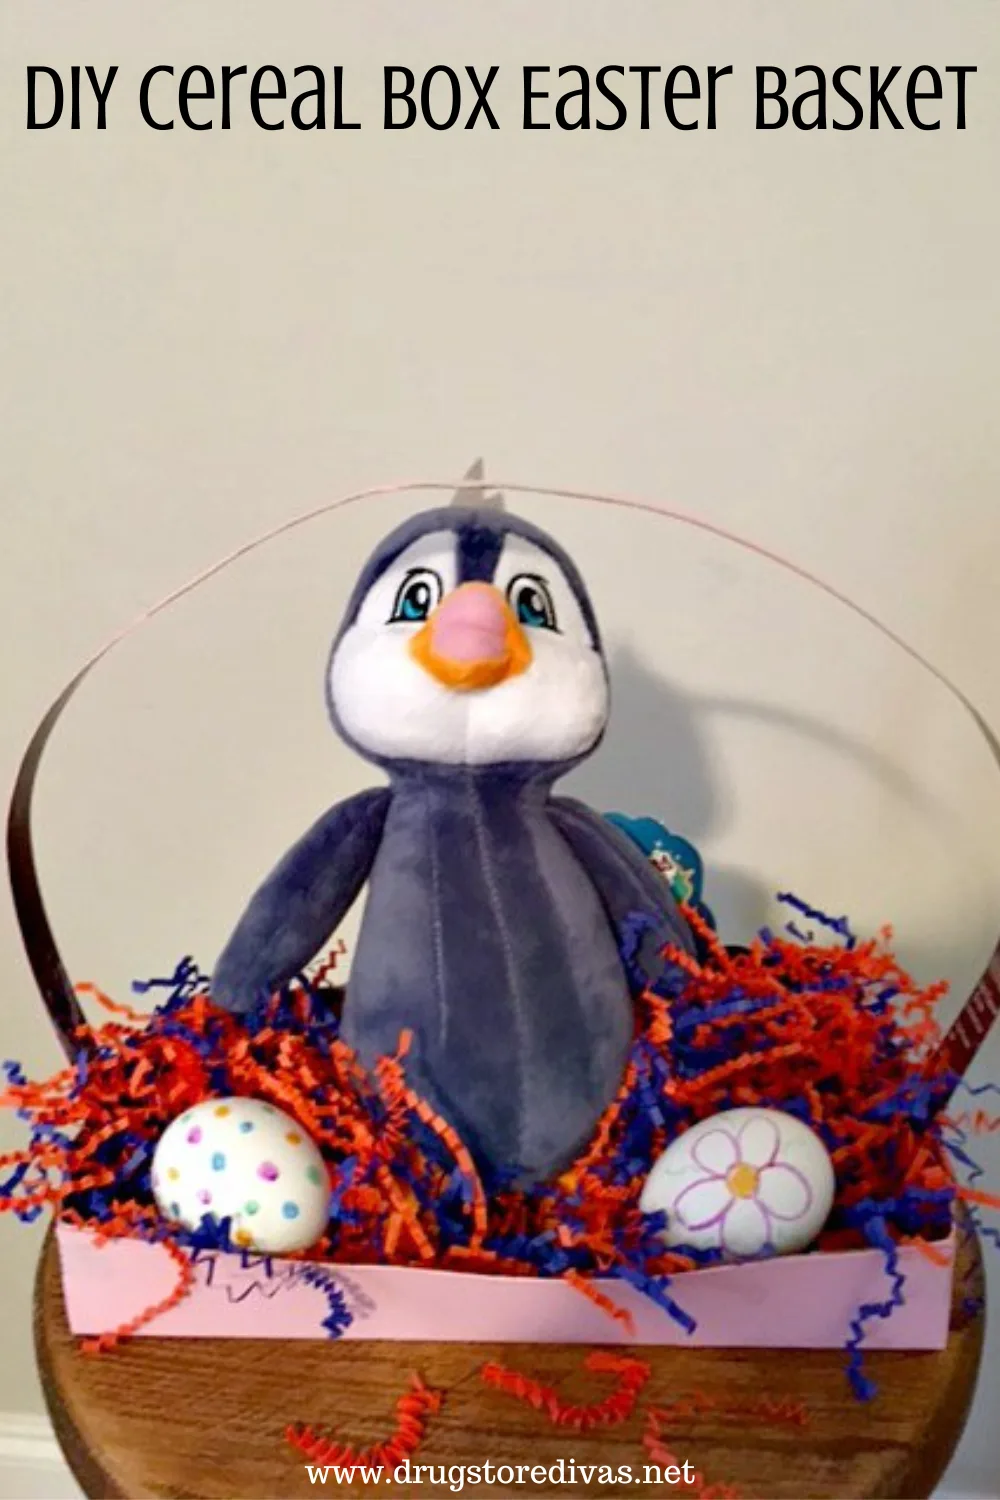 A penguin stuffed animal, paper shred, and eggs in a homemade Easter basket with the words 